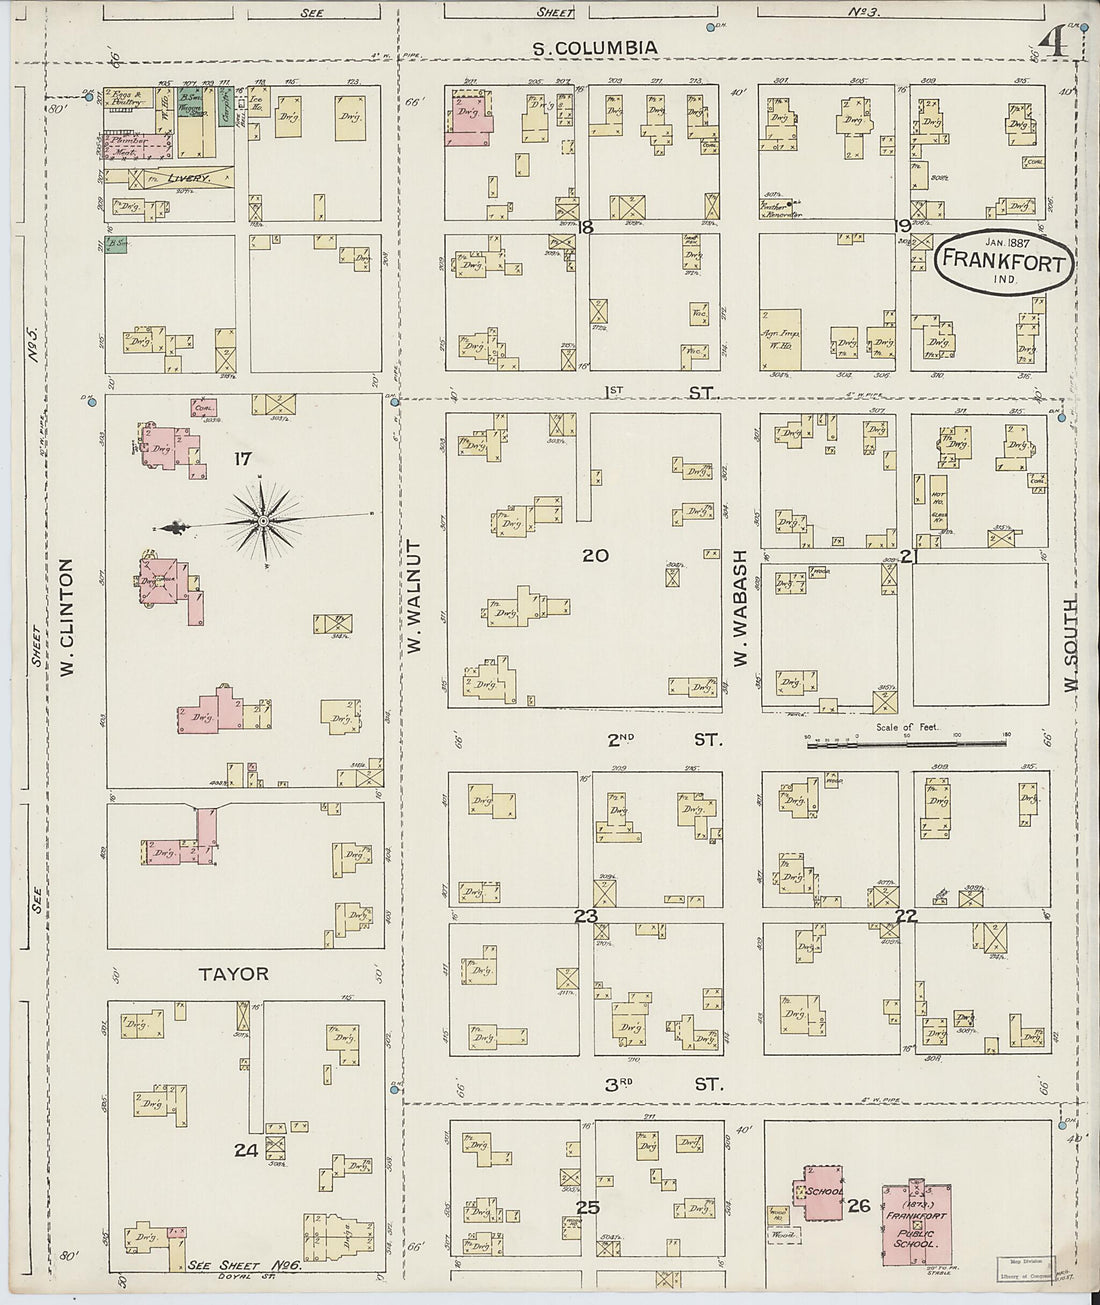 This old map of Frankfort, Clinton County, Indiana was created by Sanborn Map Company in 1887